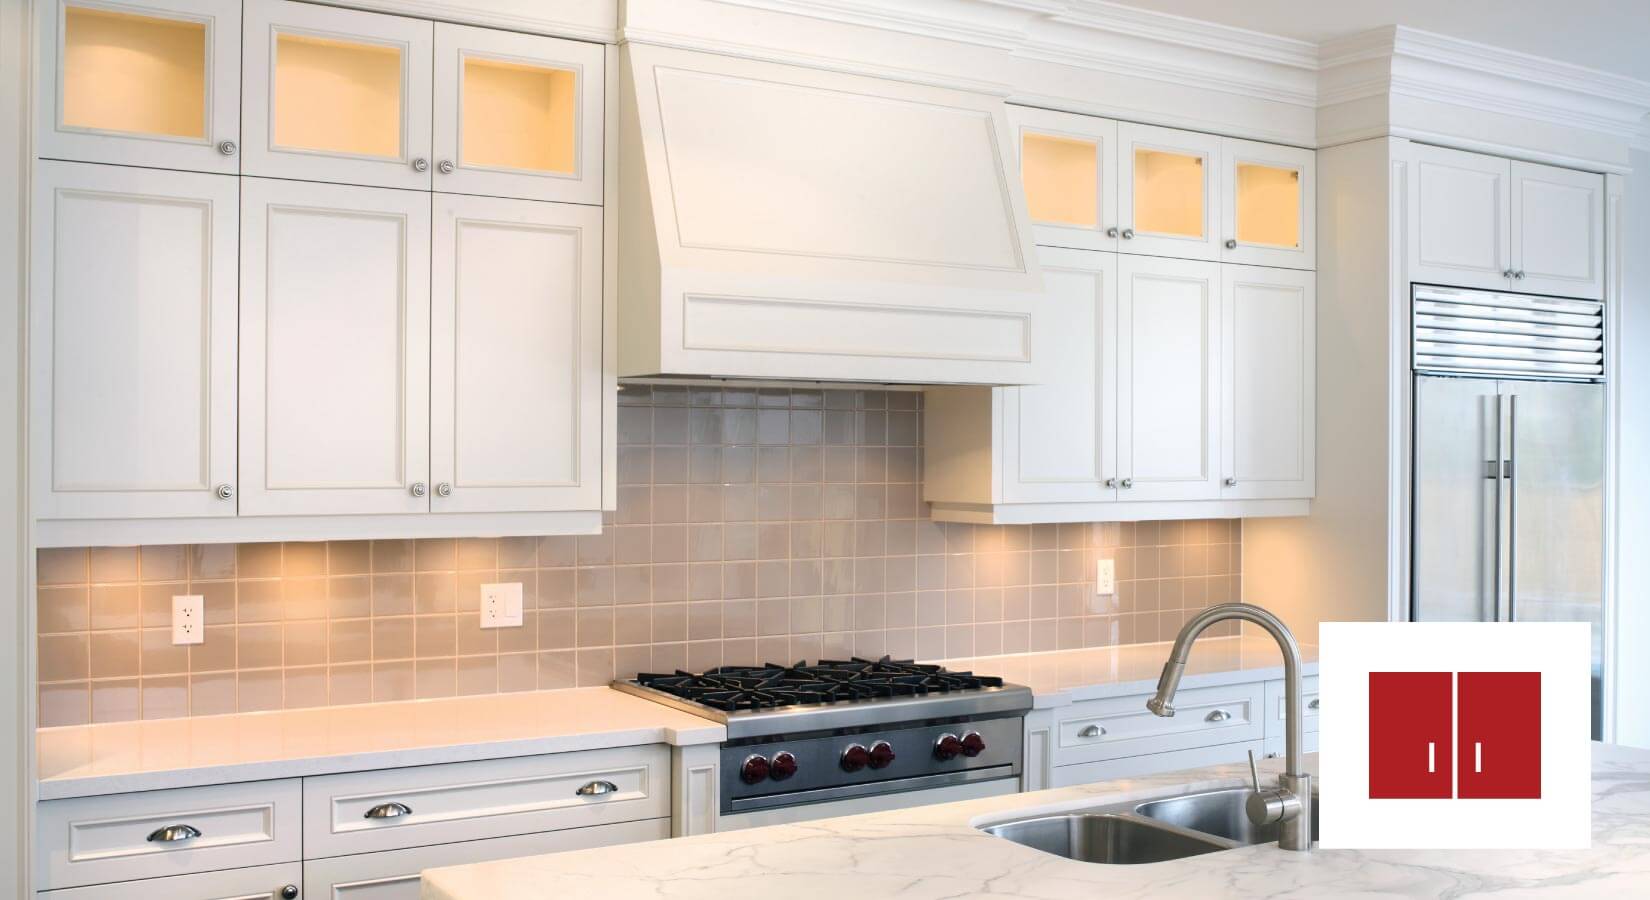 Simple white stock kitchen cabinets with brown tile backsplash.